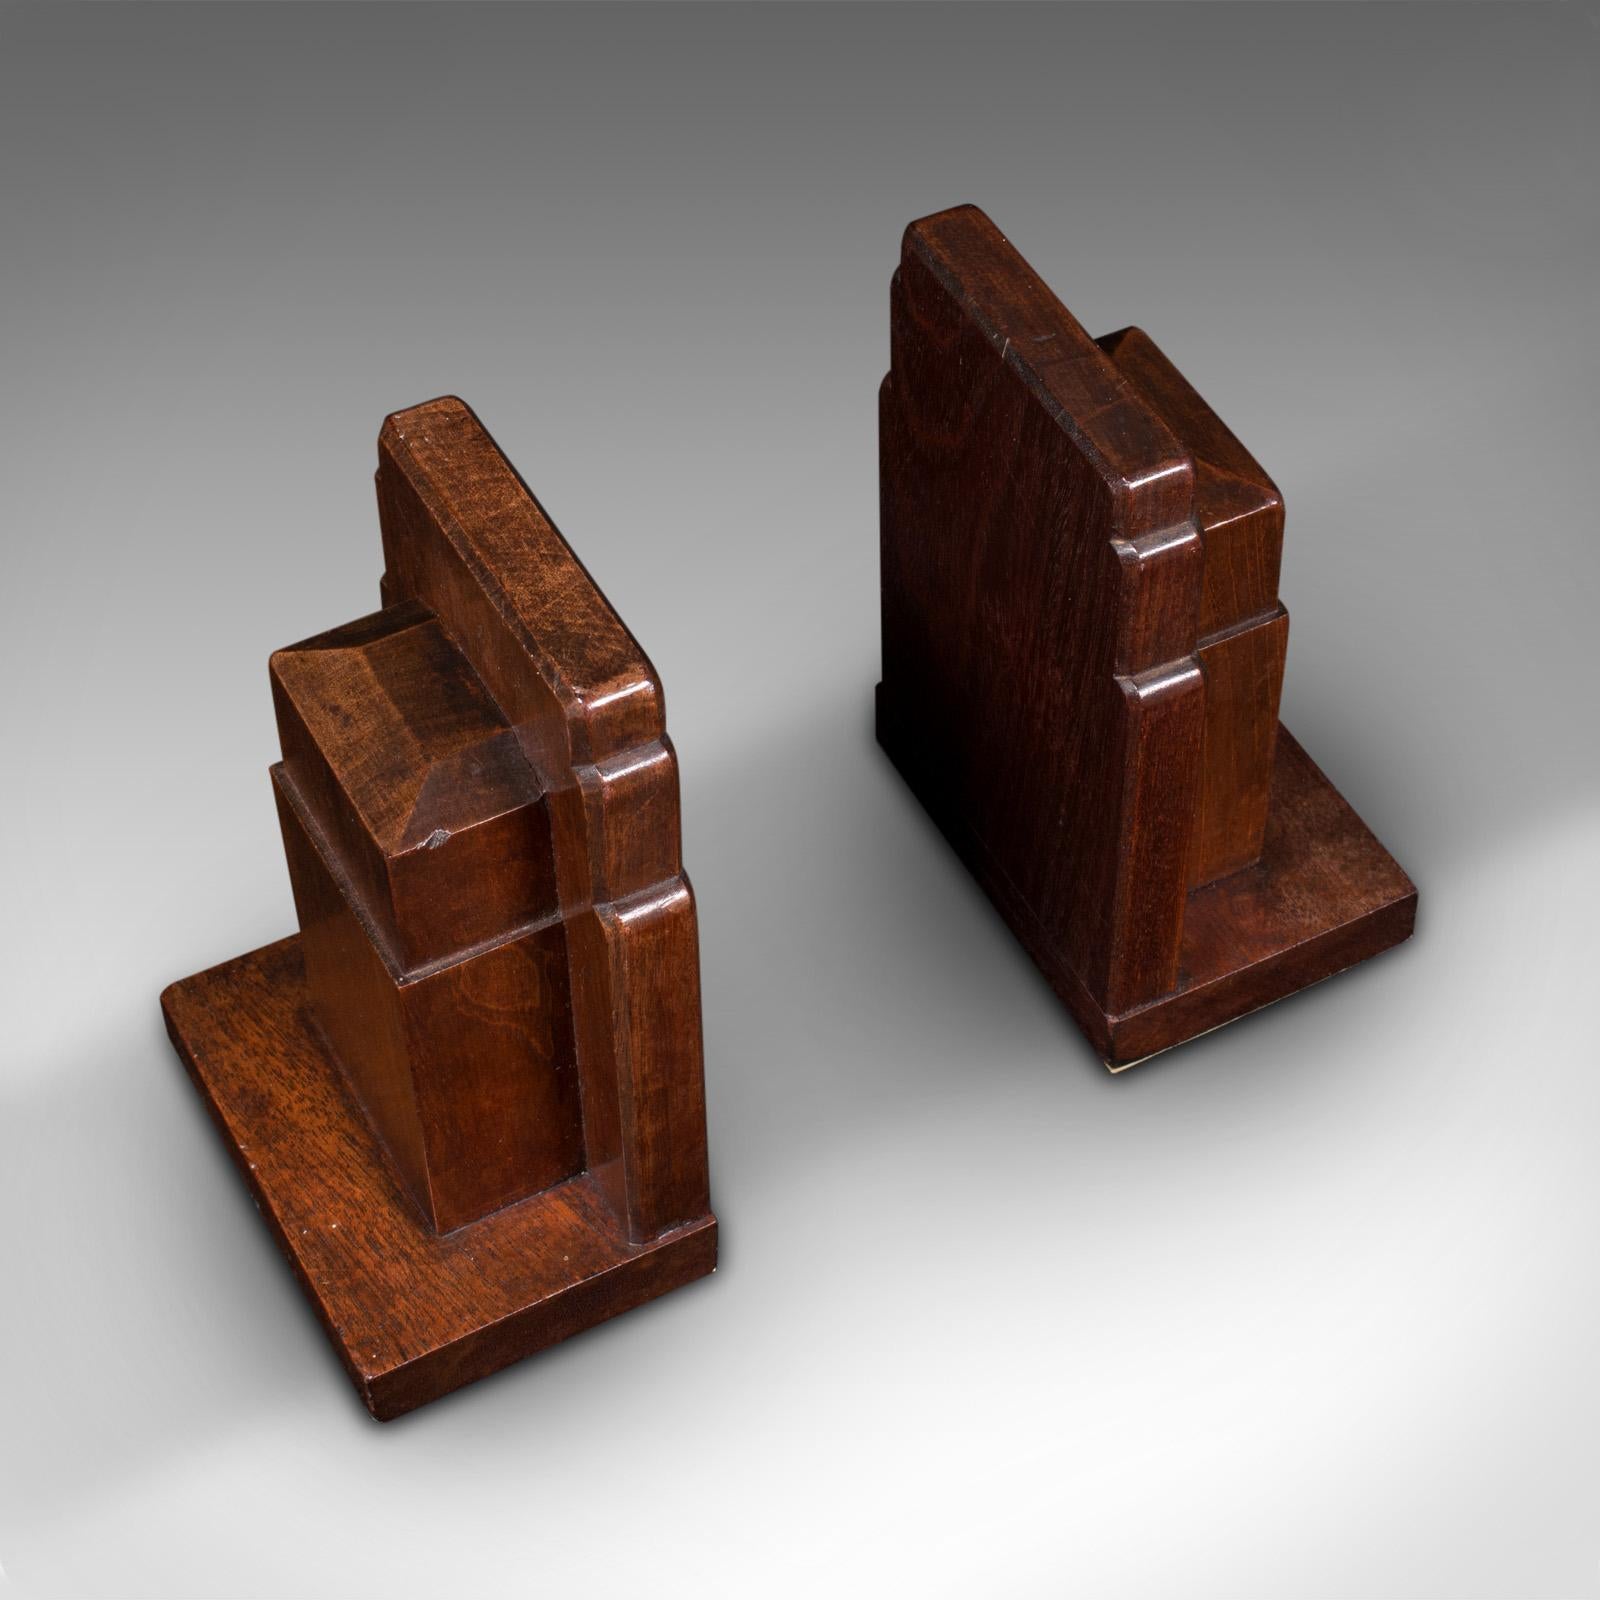 20th Century Vintage Pair of Decorative Bookends, English, Walnut, Gordon Russell, Circa 1930 For Sale